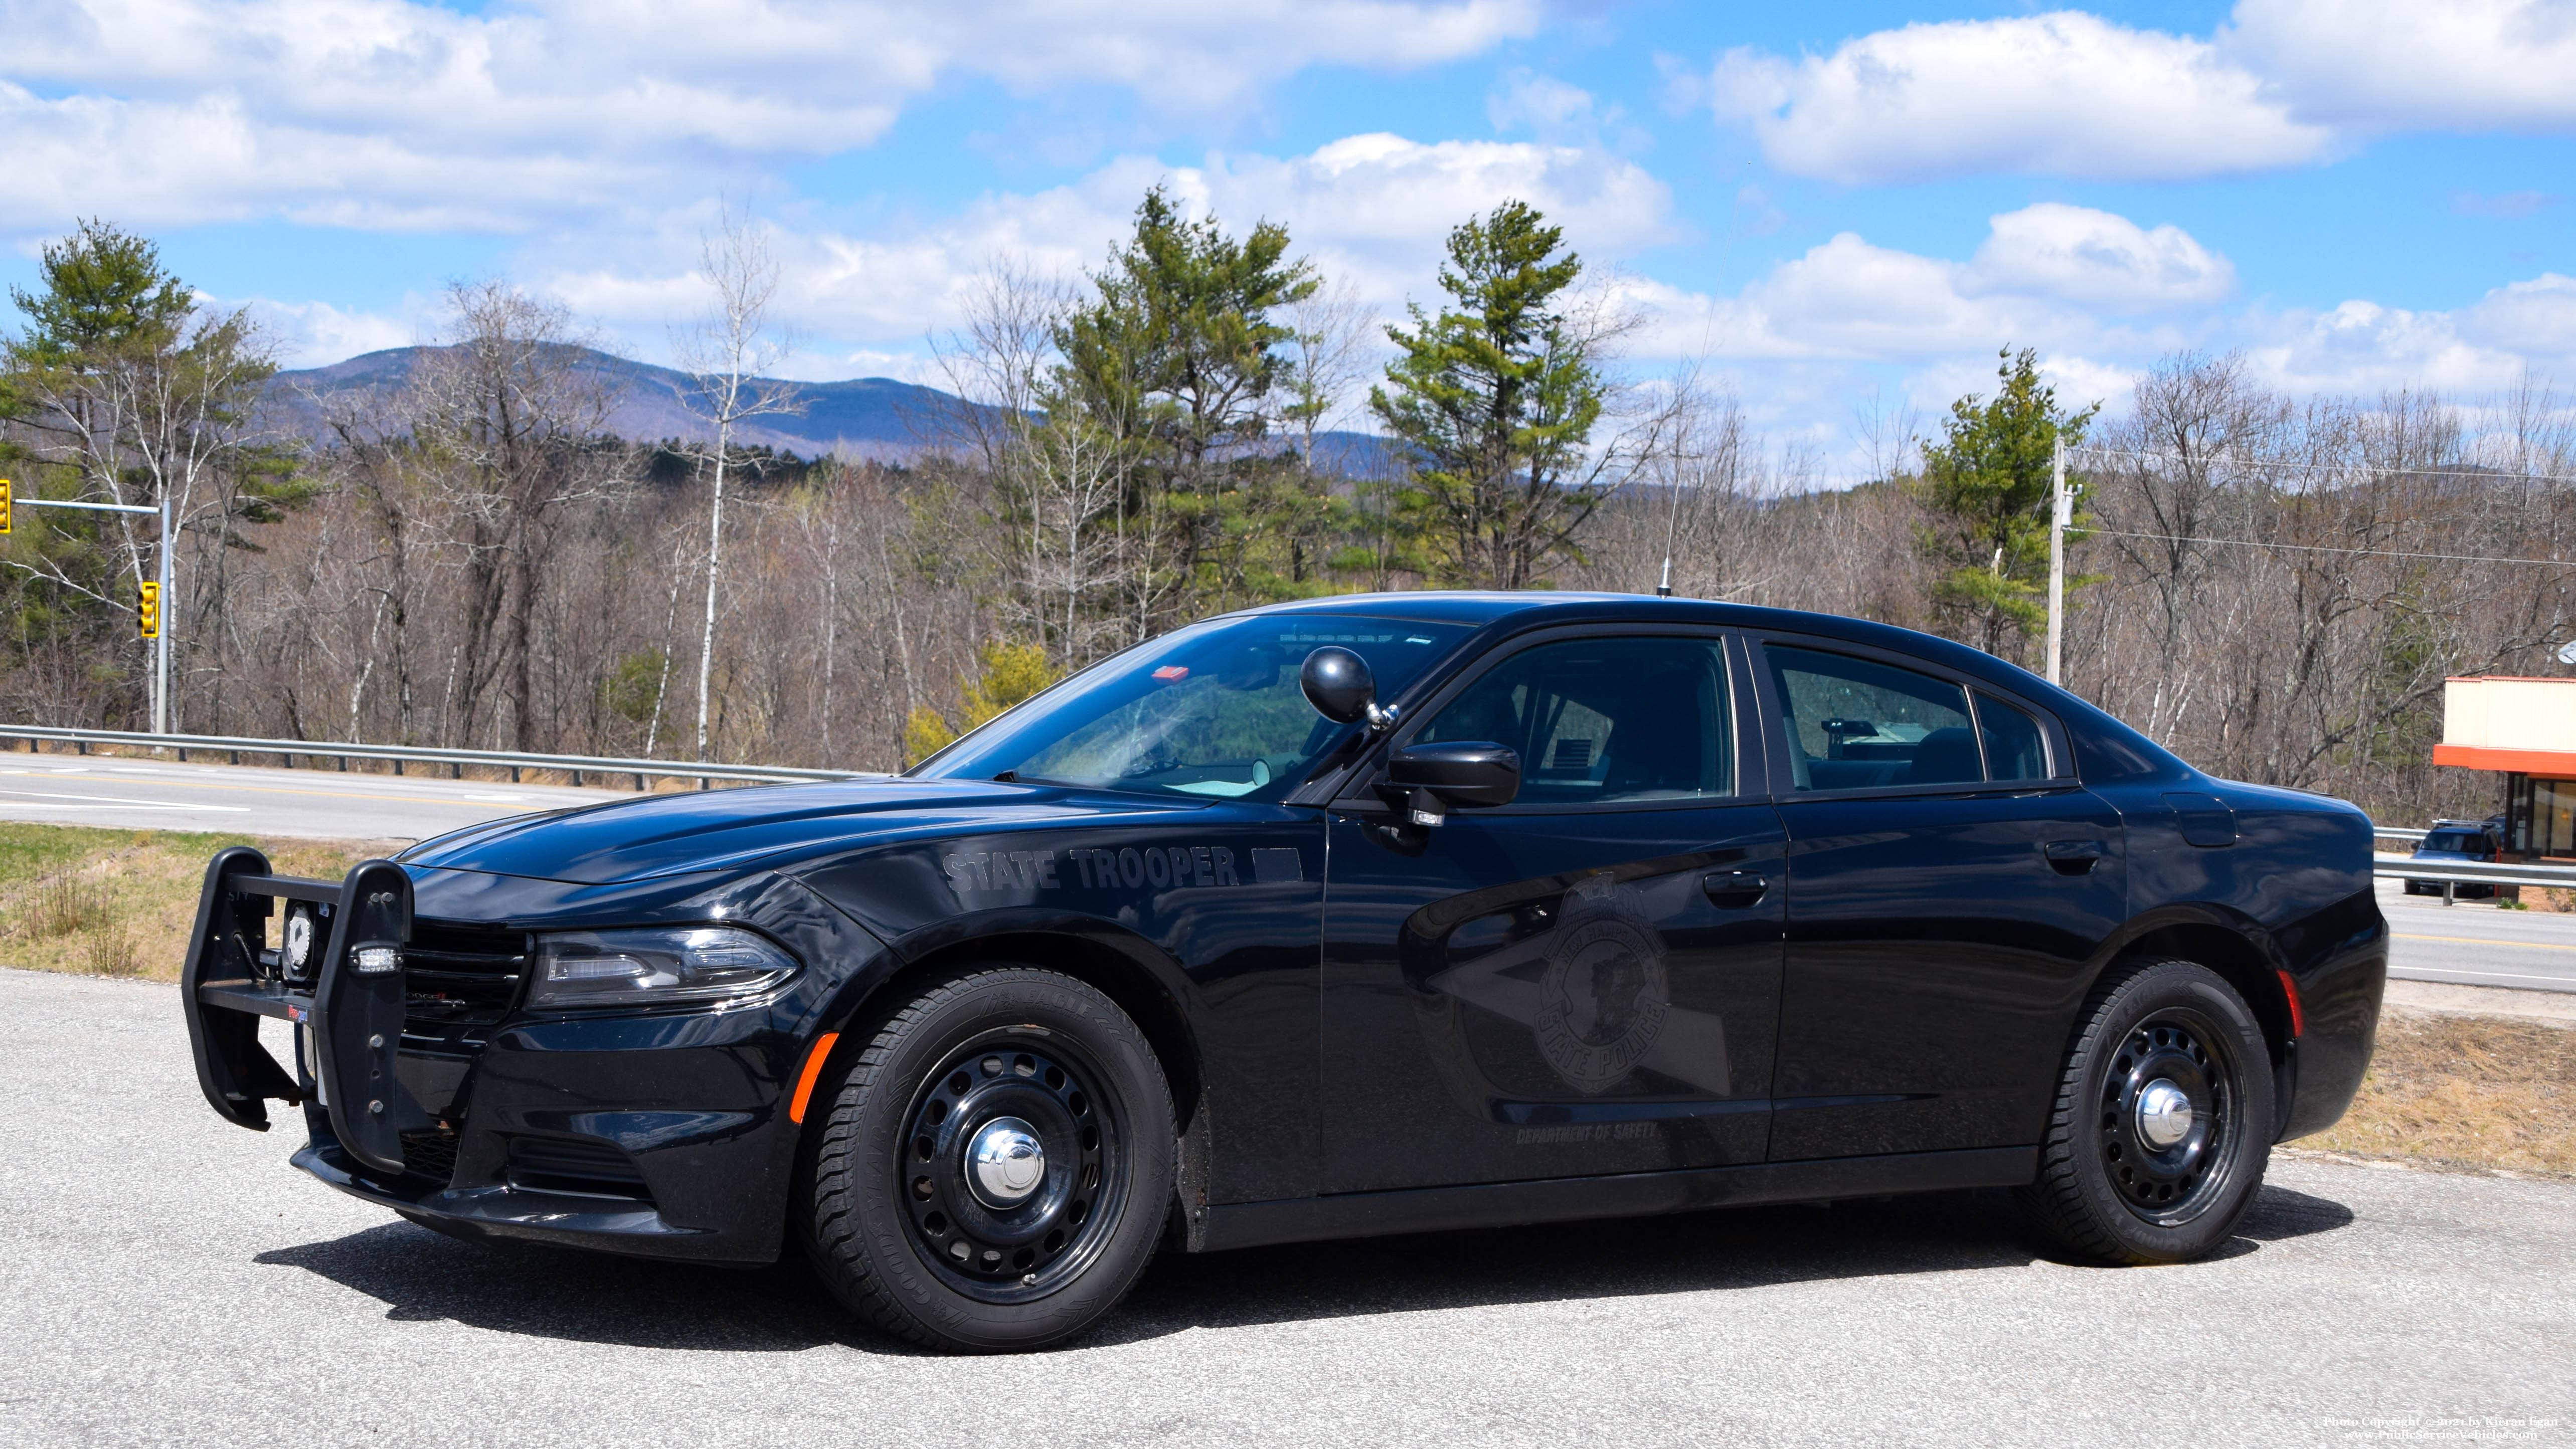 A photo  of New Hampshire State Police
            Cruiser 408, a 2015-2016 Dodge Charger             taken by Kieran Egan